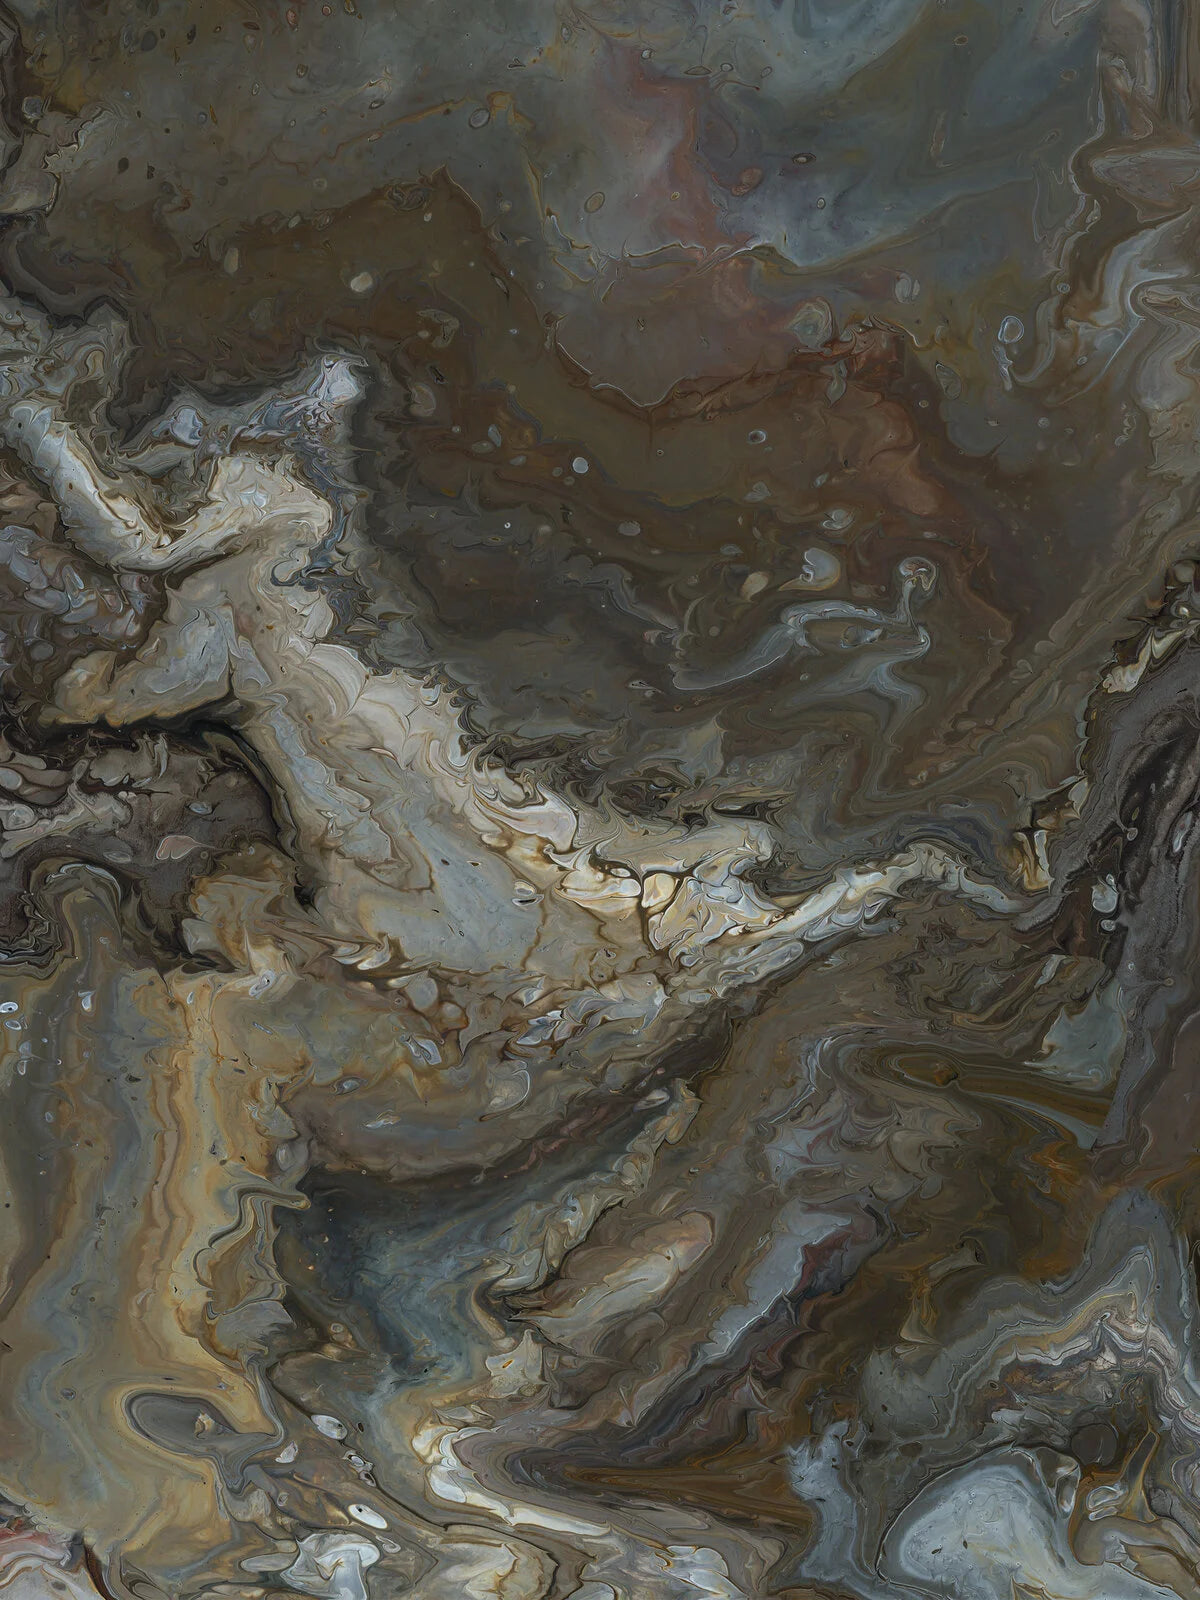 Marbled Paper wallpaper is inspired by the exquisite interplay of shades found in this naturally occurring stone.